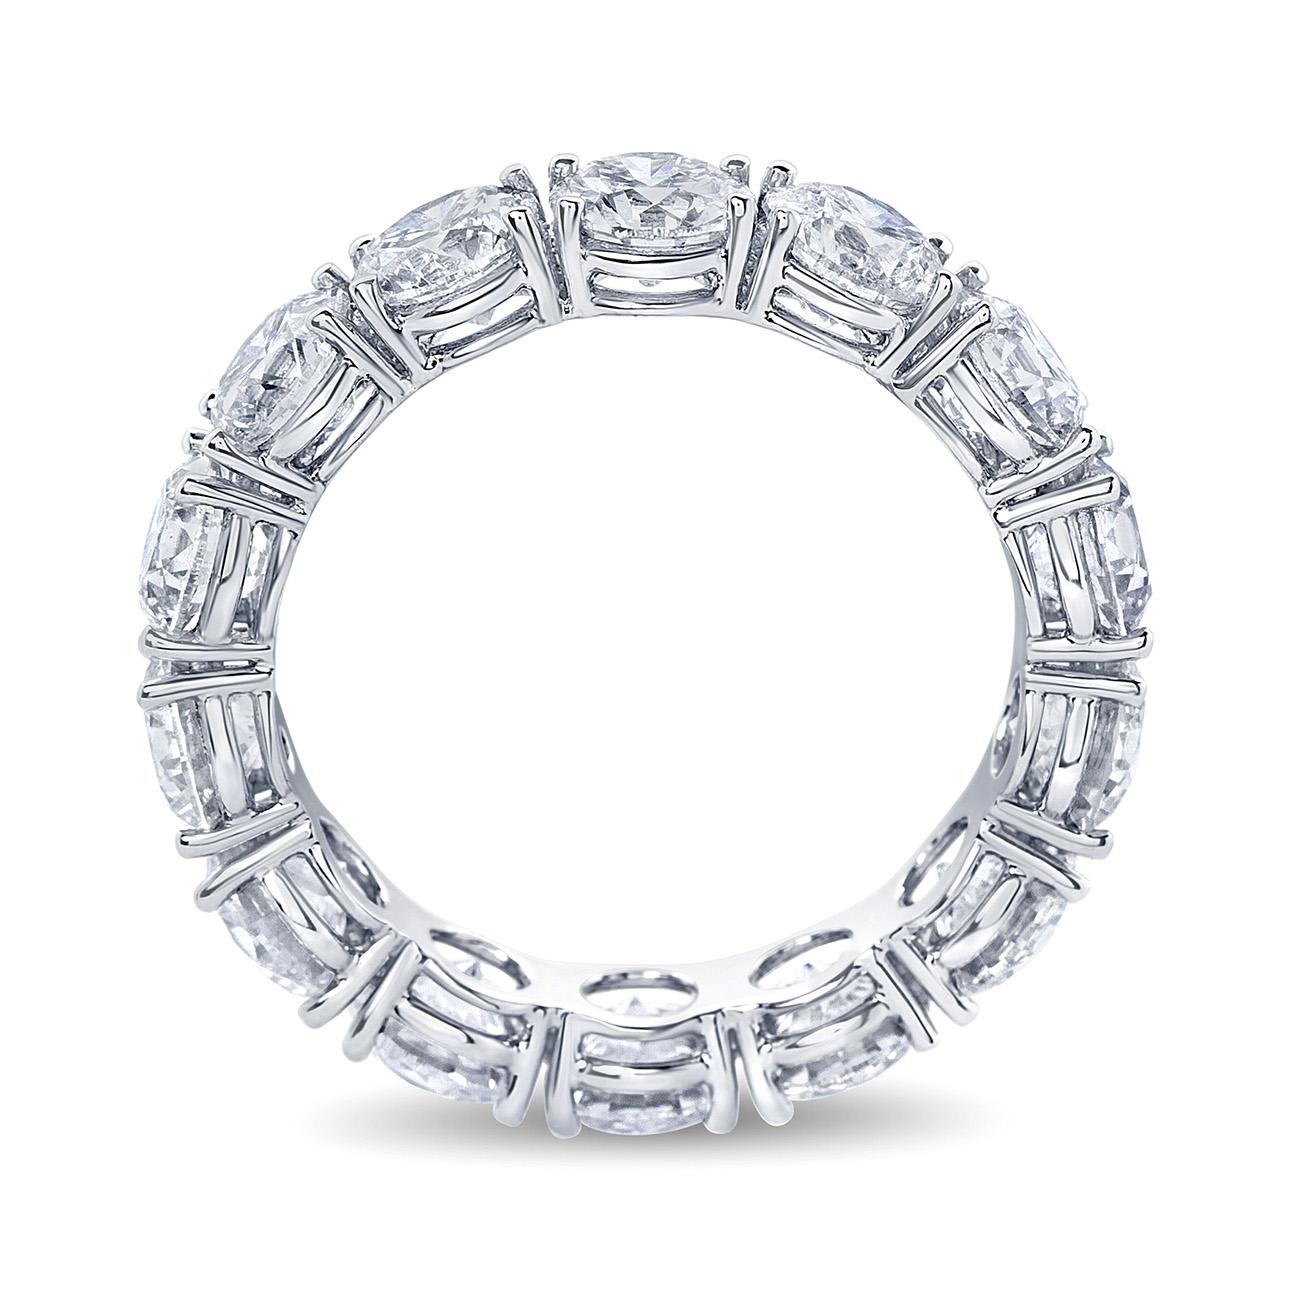 Exquisite eternity band. hand crafted in 18k GOLD each one of the 15 diamonds weigh .31 carats G-H color SI clarity, with a 4.73 carat total weight. The beautiful Diamonds are mounted in a shared prong setting, thus showing minimal amount of metal